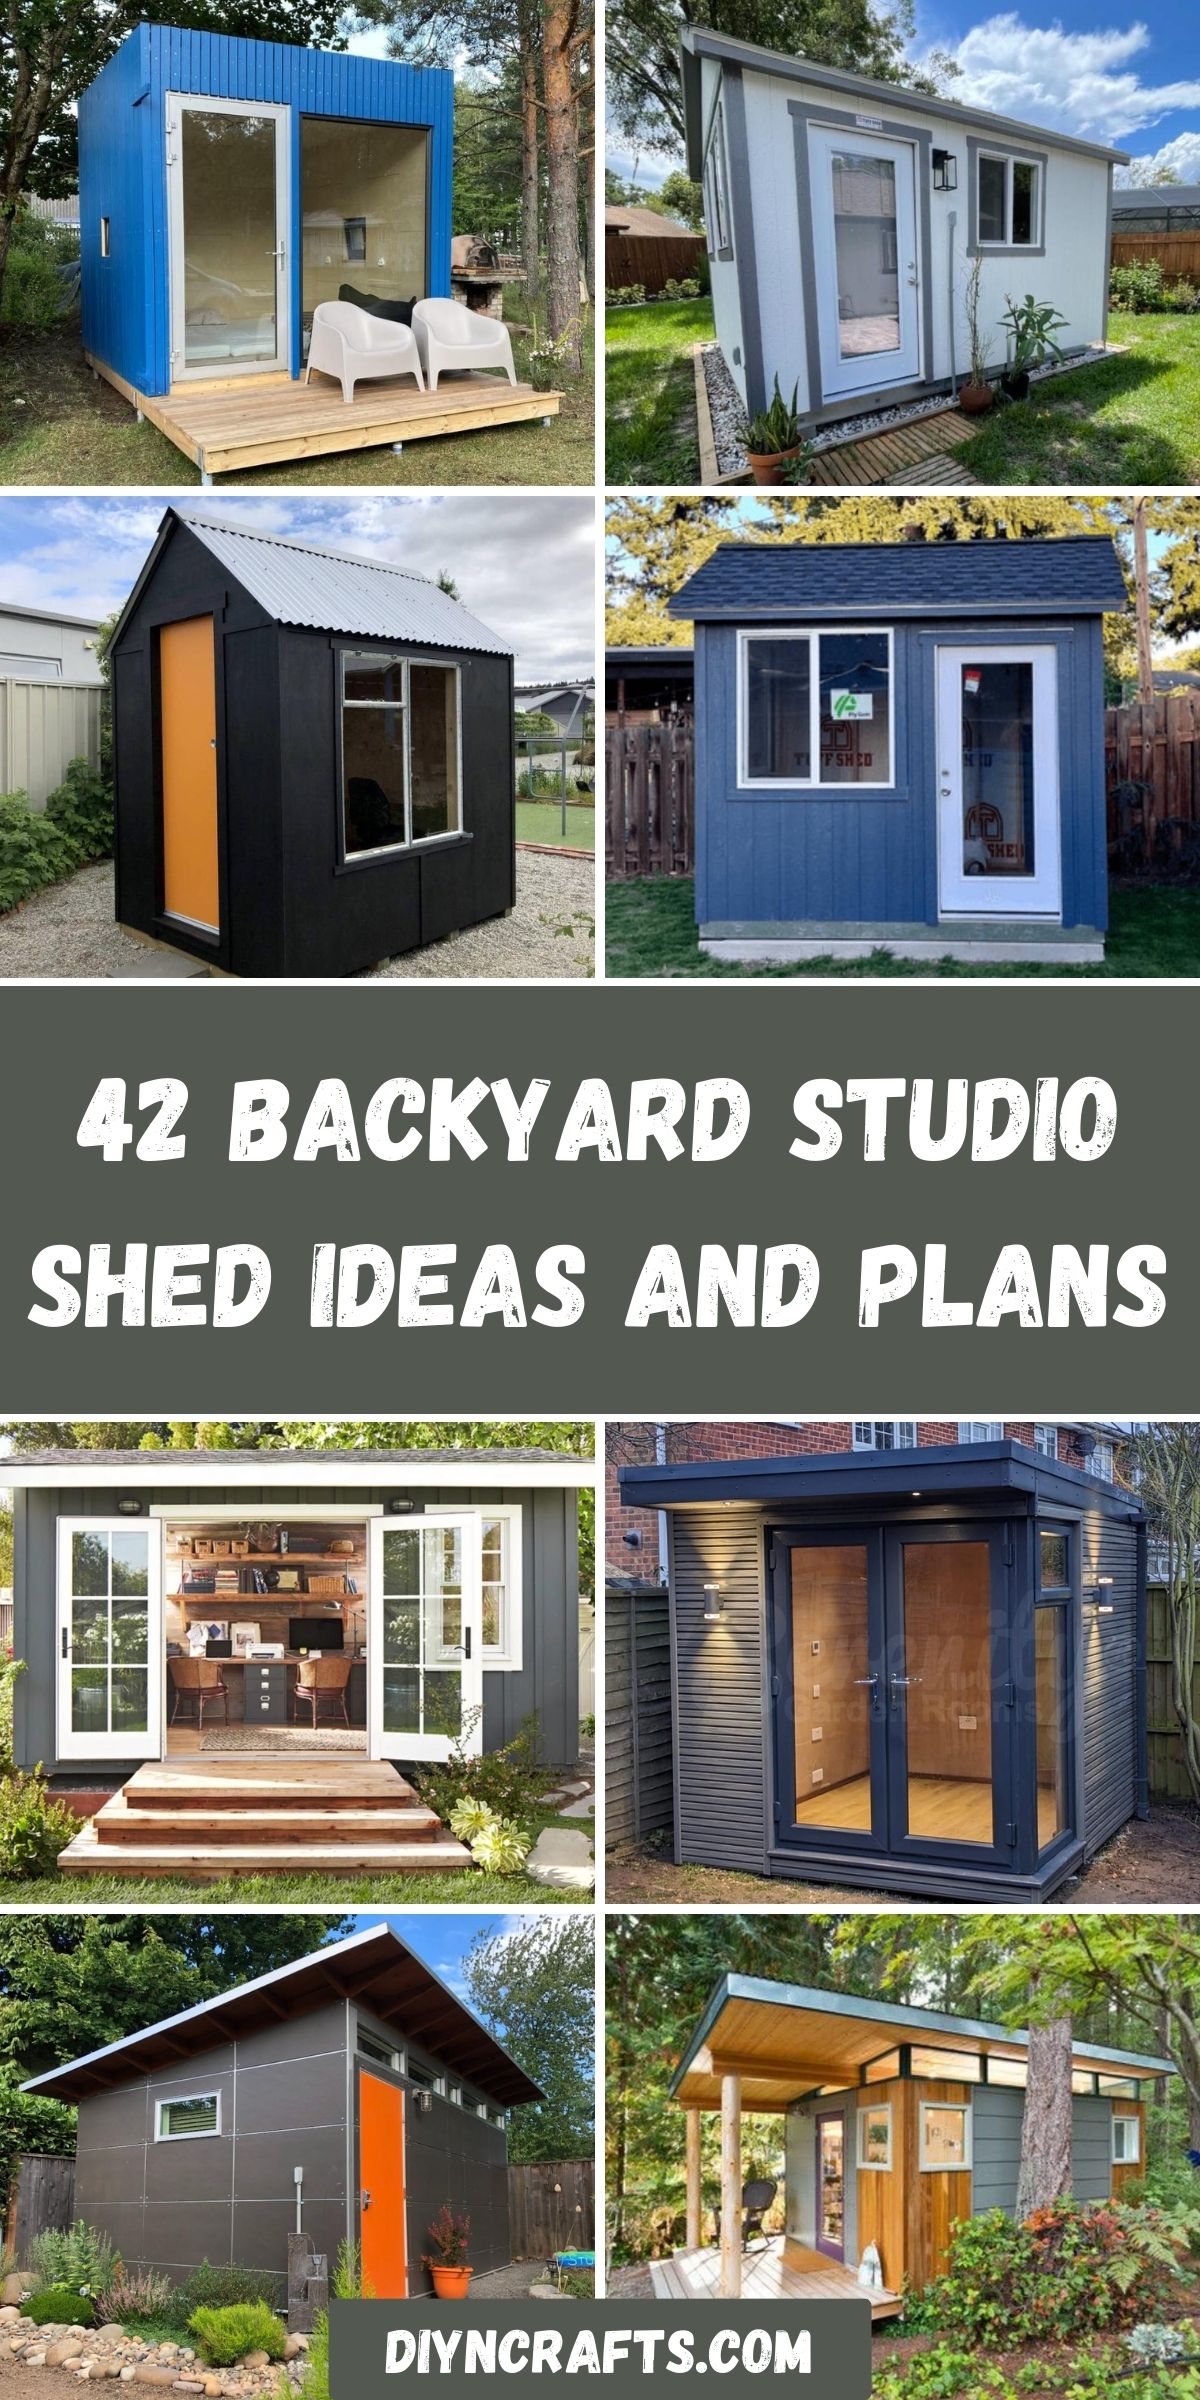 42 Backyard Studio Shed Ideas and Plans collage.